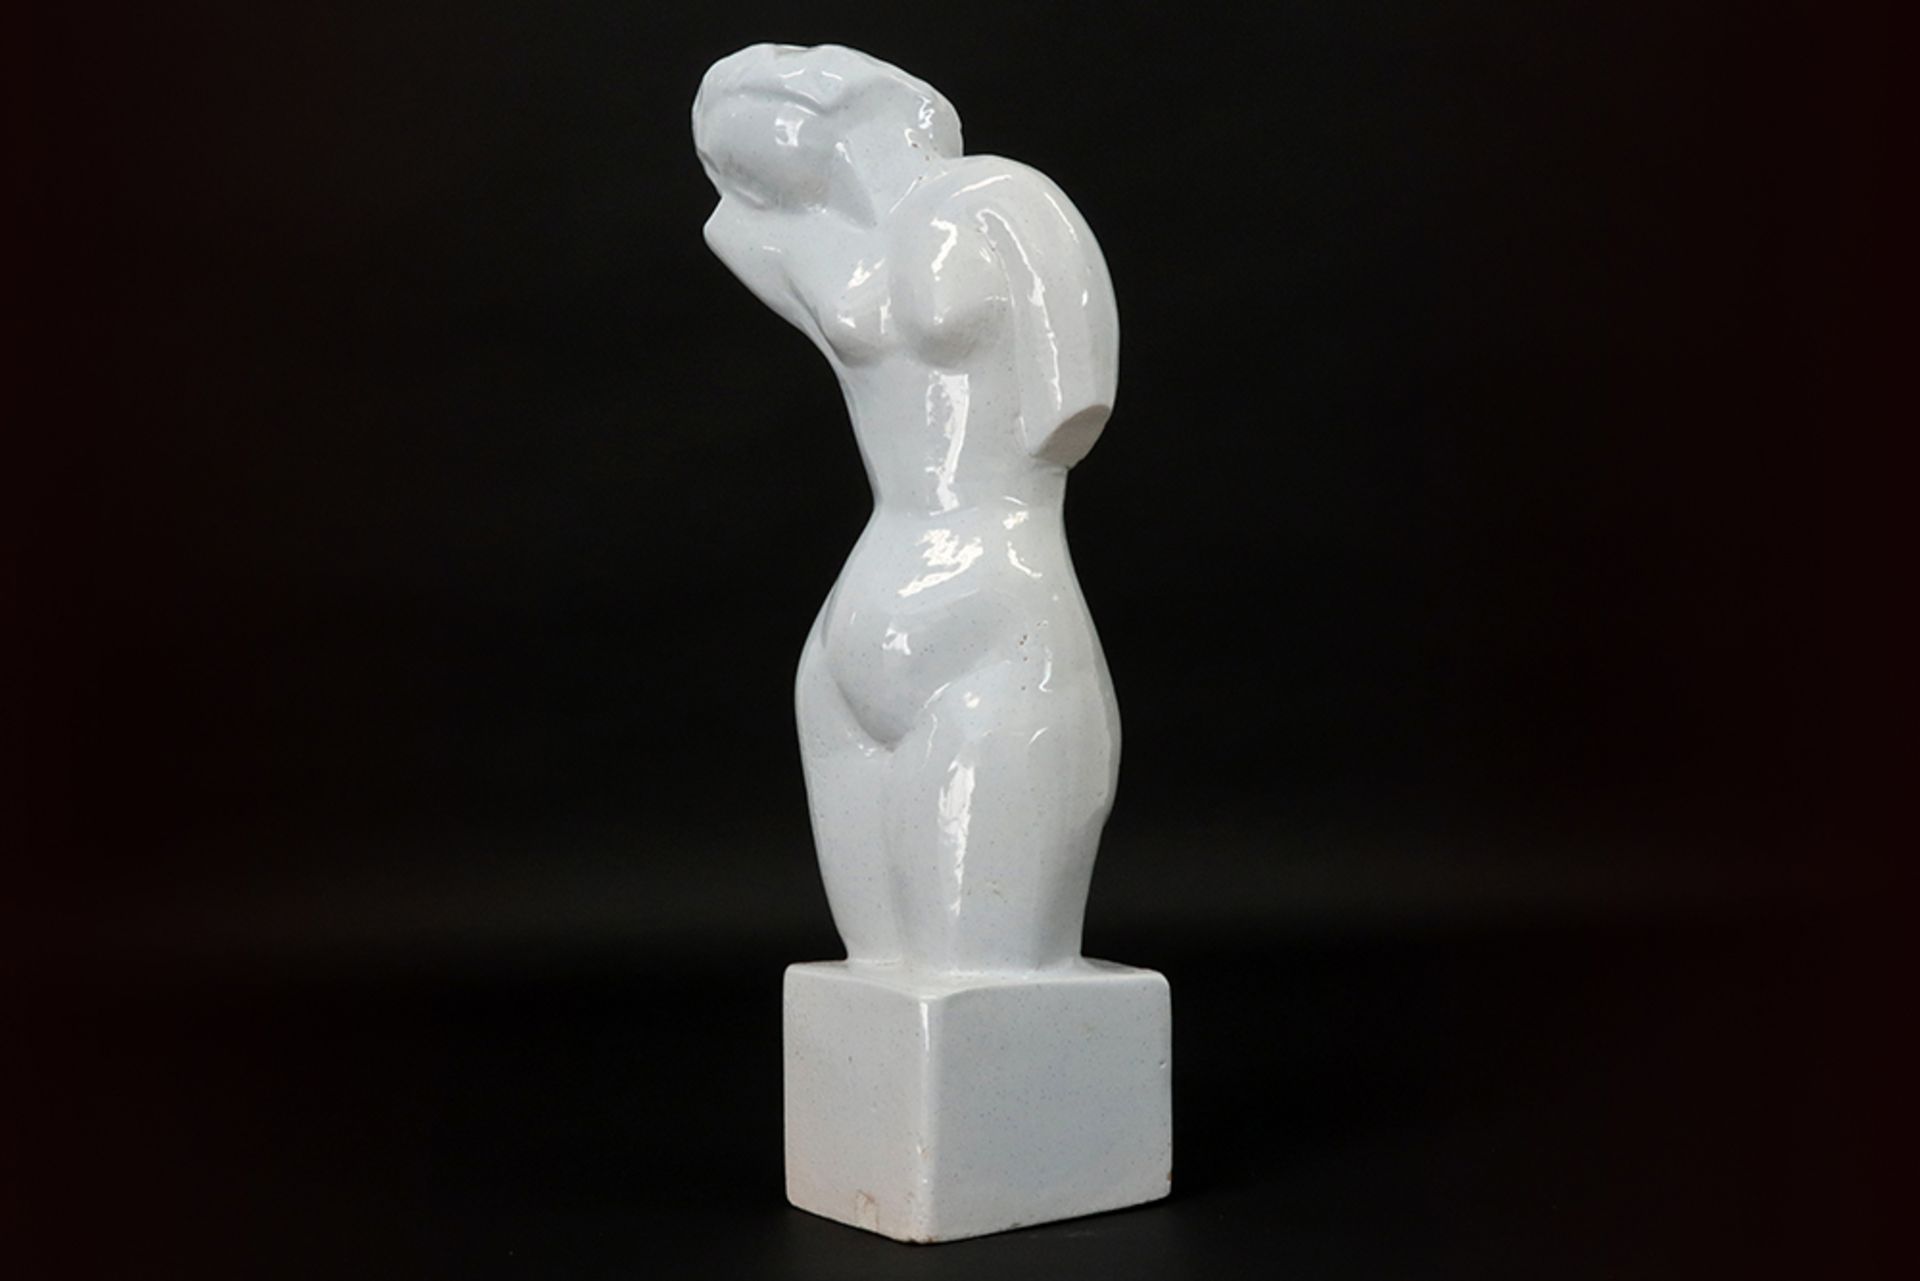 20th Cent. Belgian sculpture in glazed ceramic - signed Jan Cockx || COCKX JAN (1891 - 1976) - Image 2 of 4